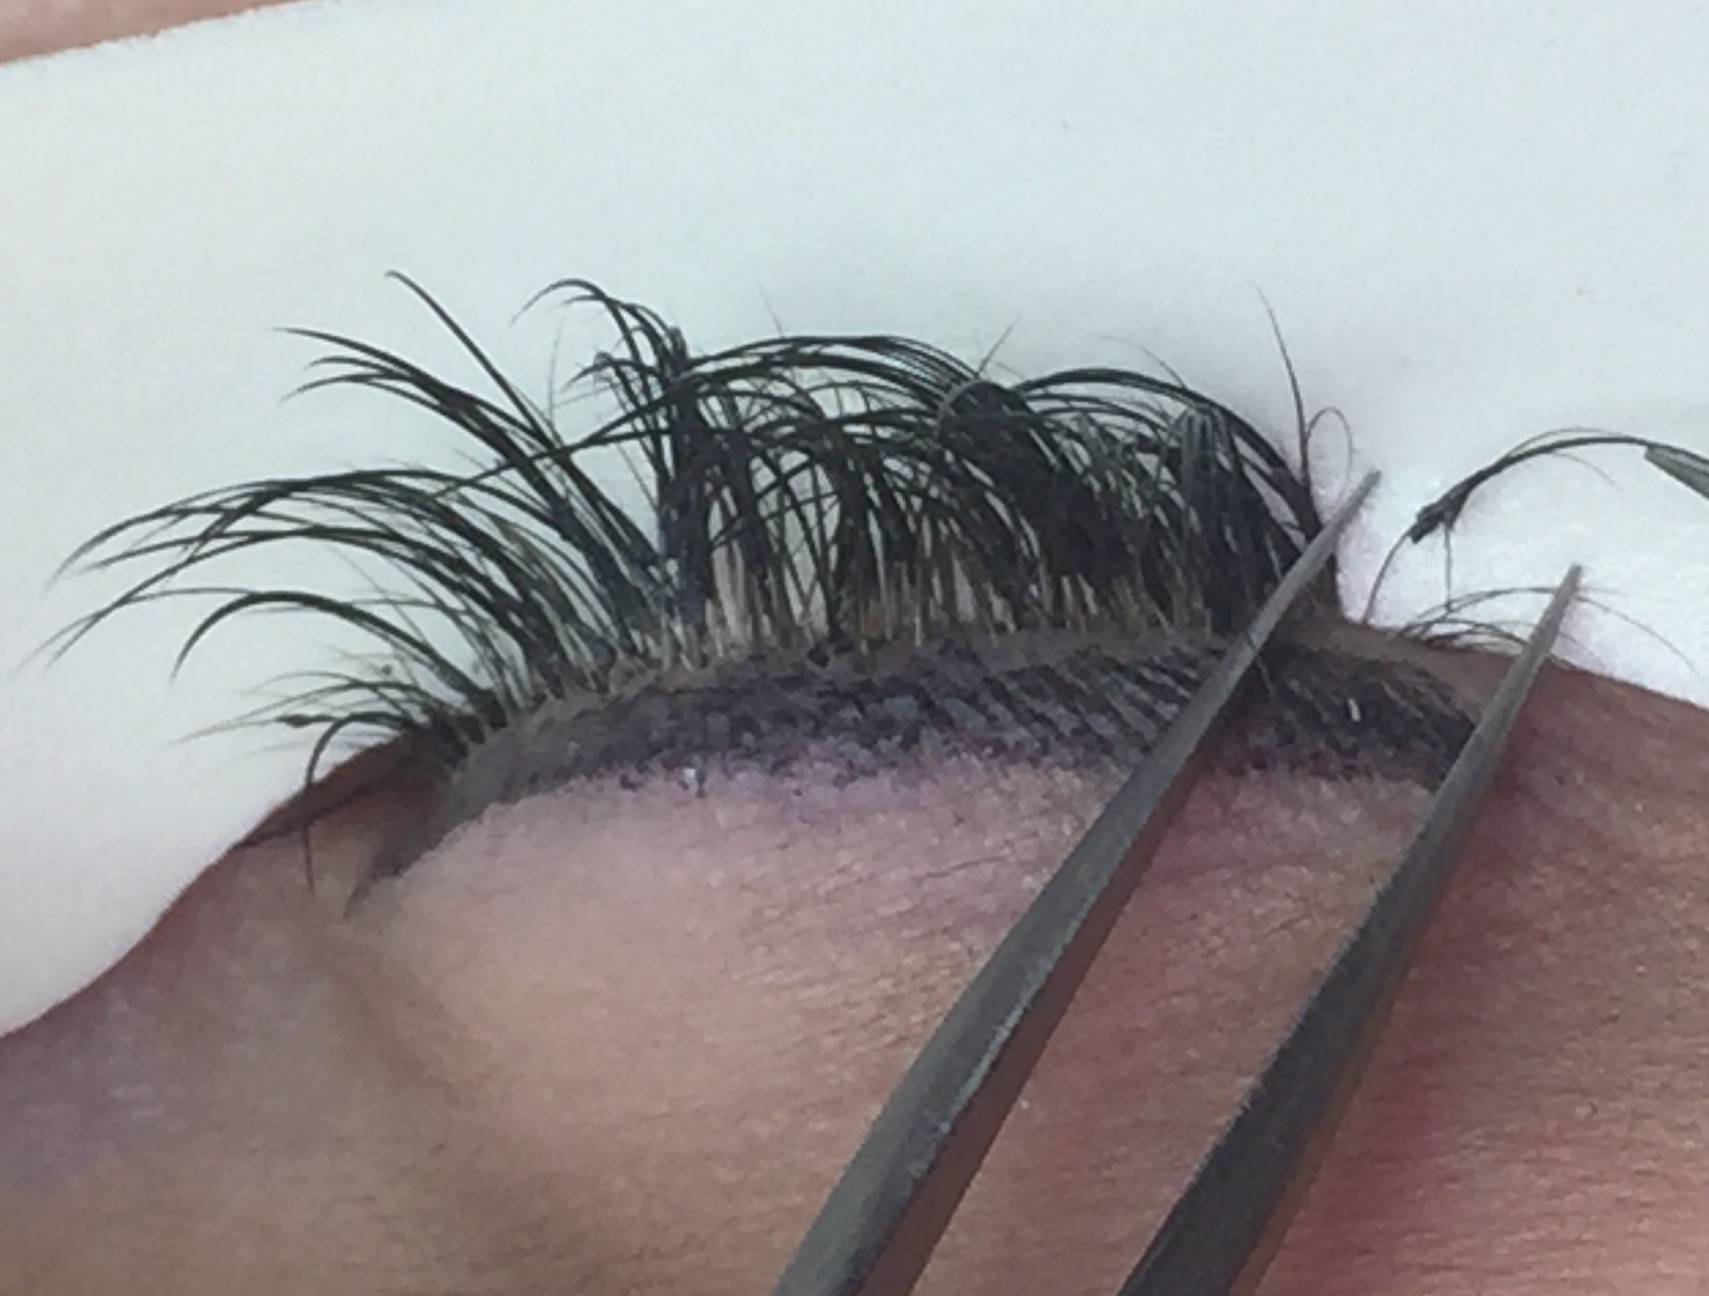 You can see how this extension is attached to multiple hairs and has excess adhesive. The extensions are also placed entirely too far from the base of the lash.&nbsp;